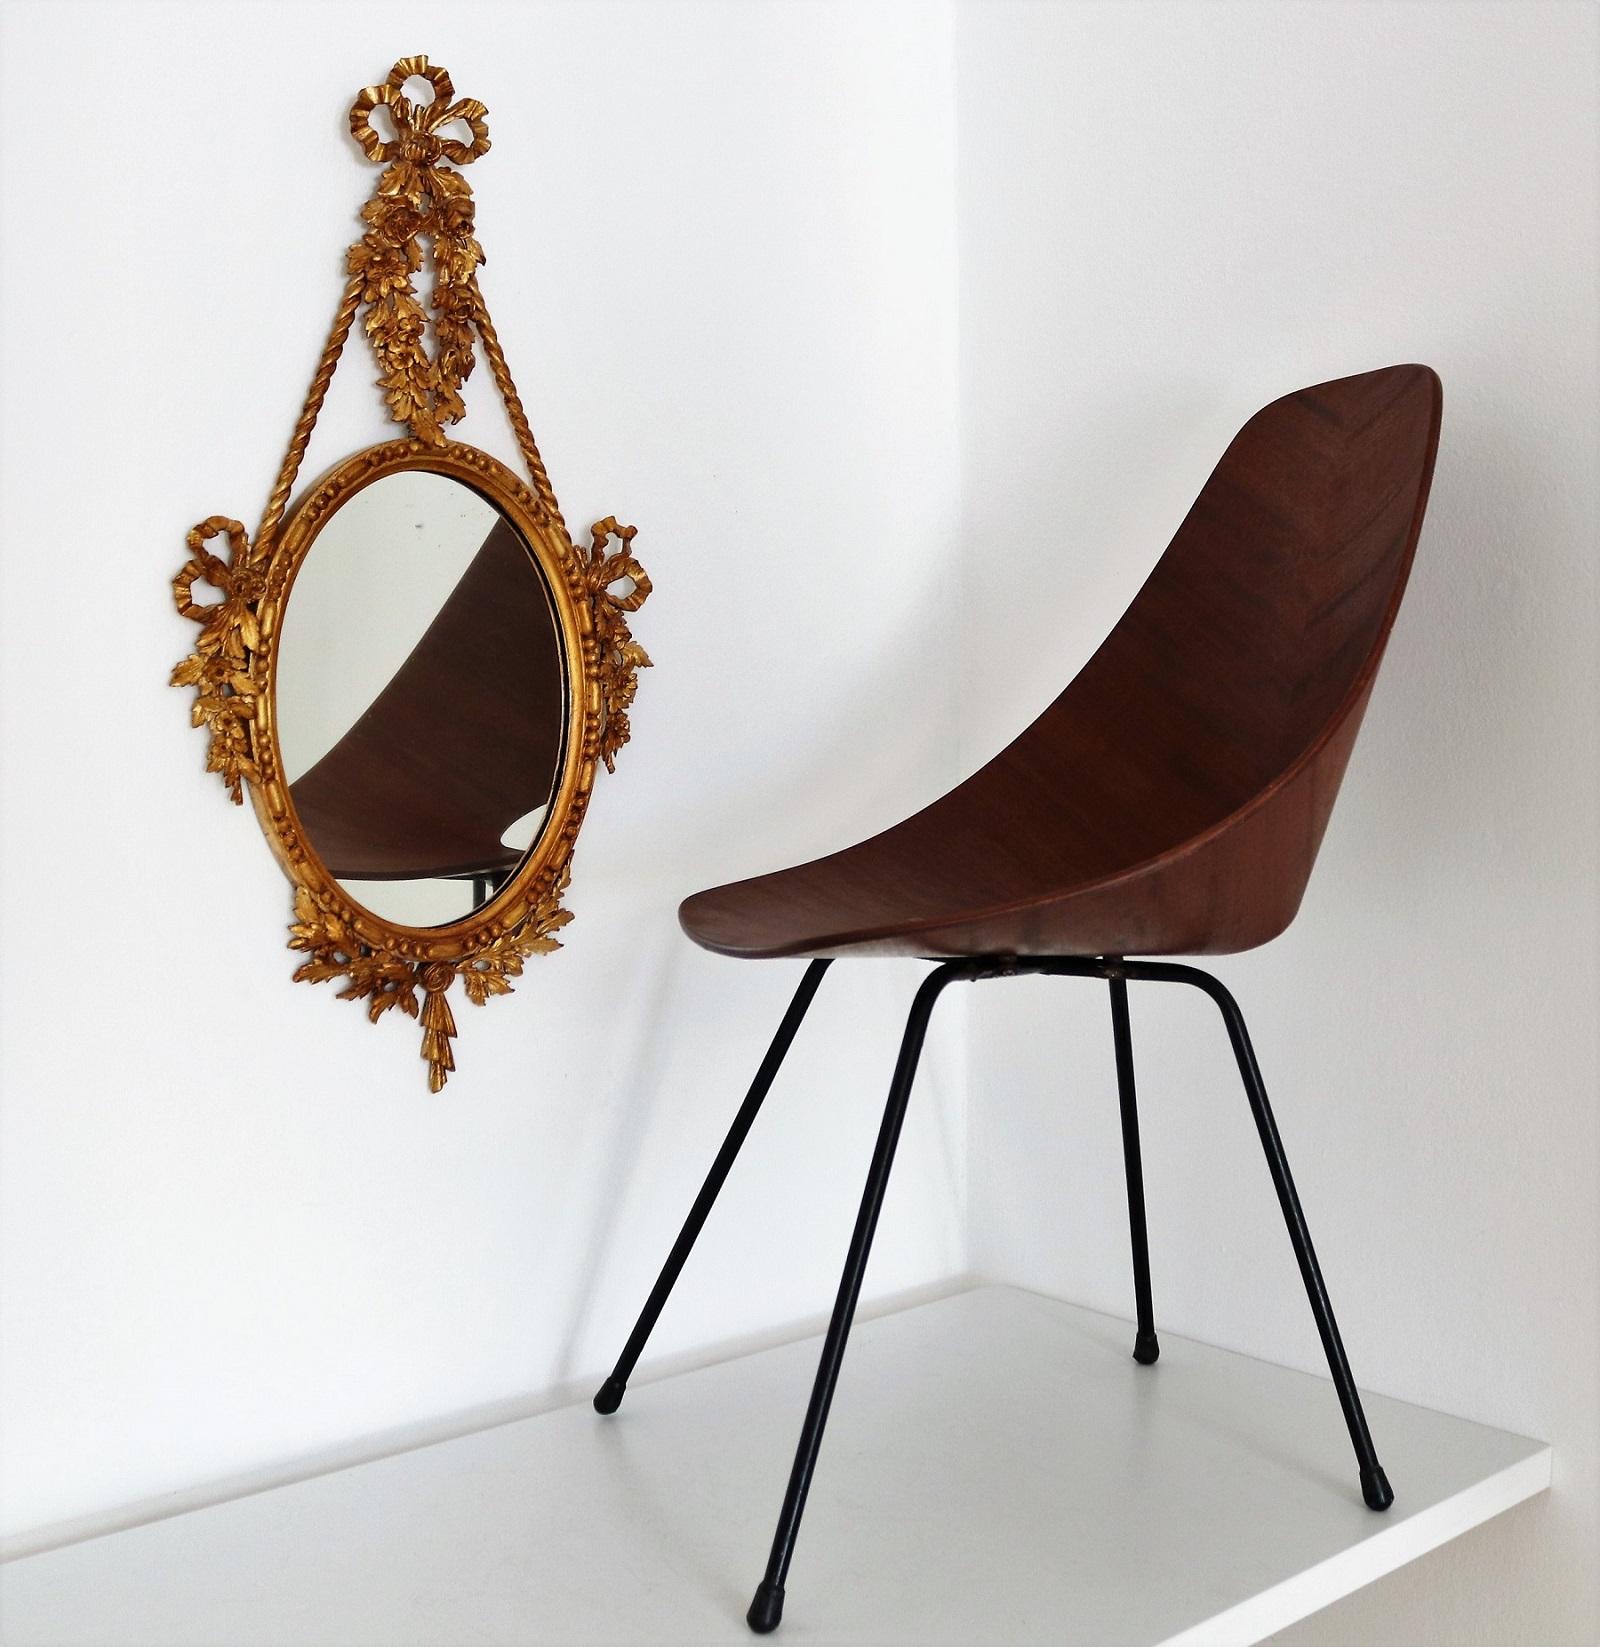 Mid-Century Modern Italian Midcentury Carved Wall Mirror with Gilt Wooden Frame, 1950s